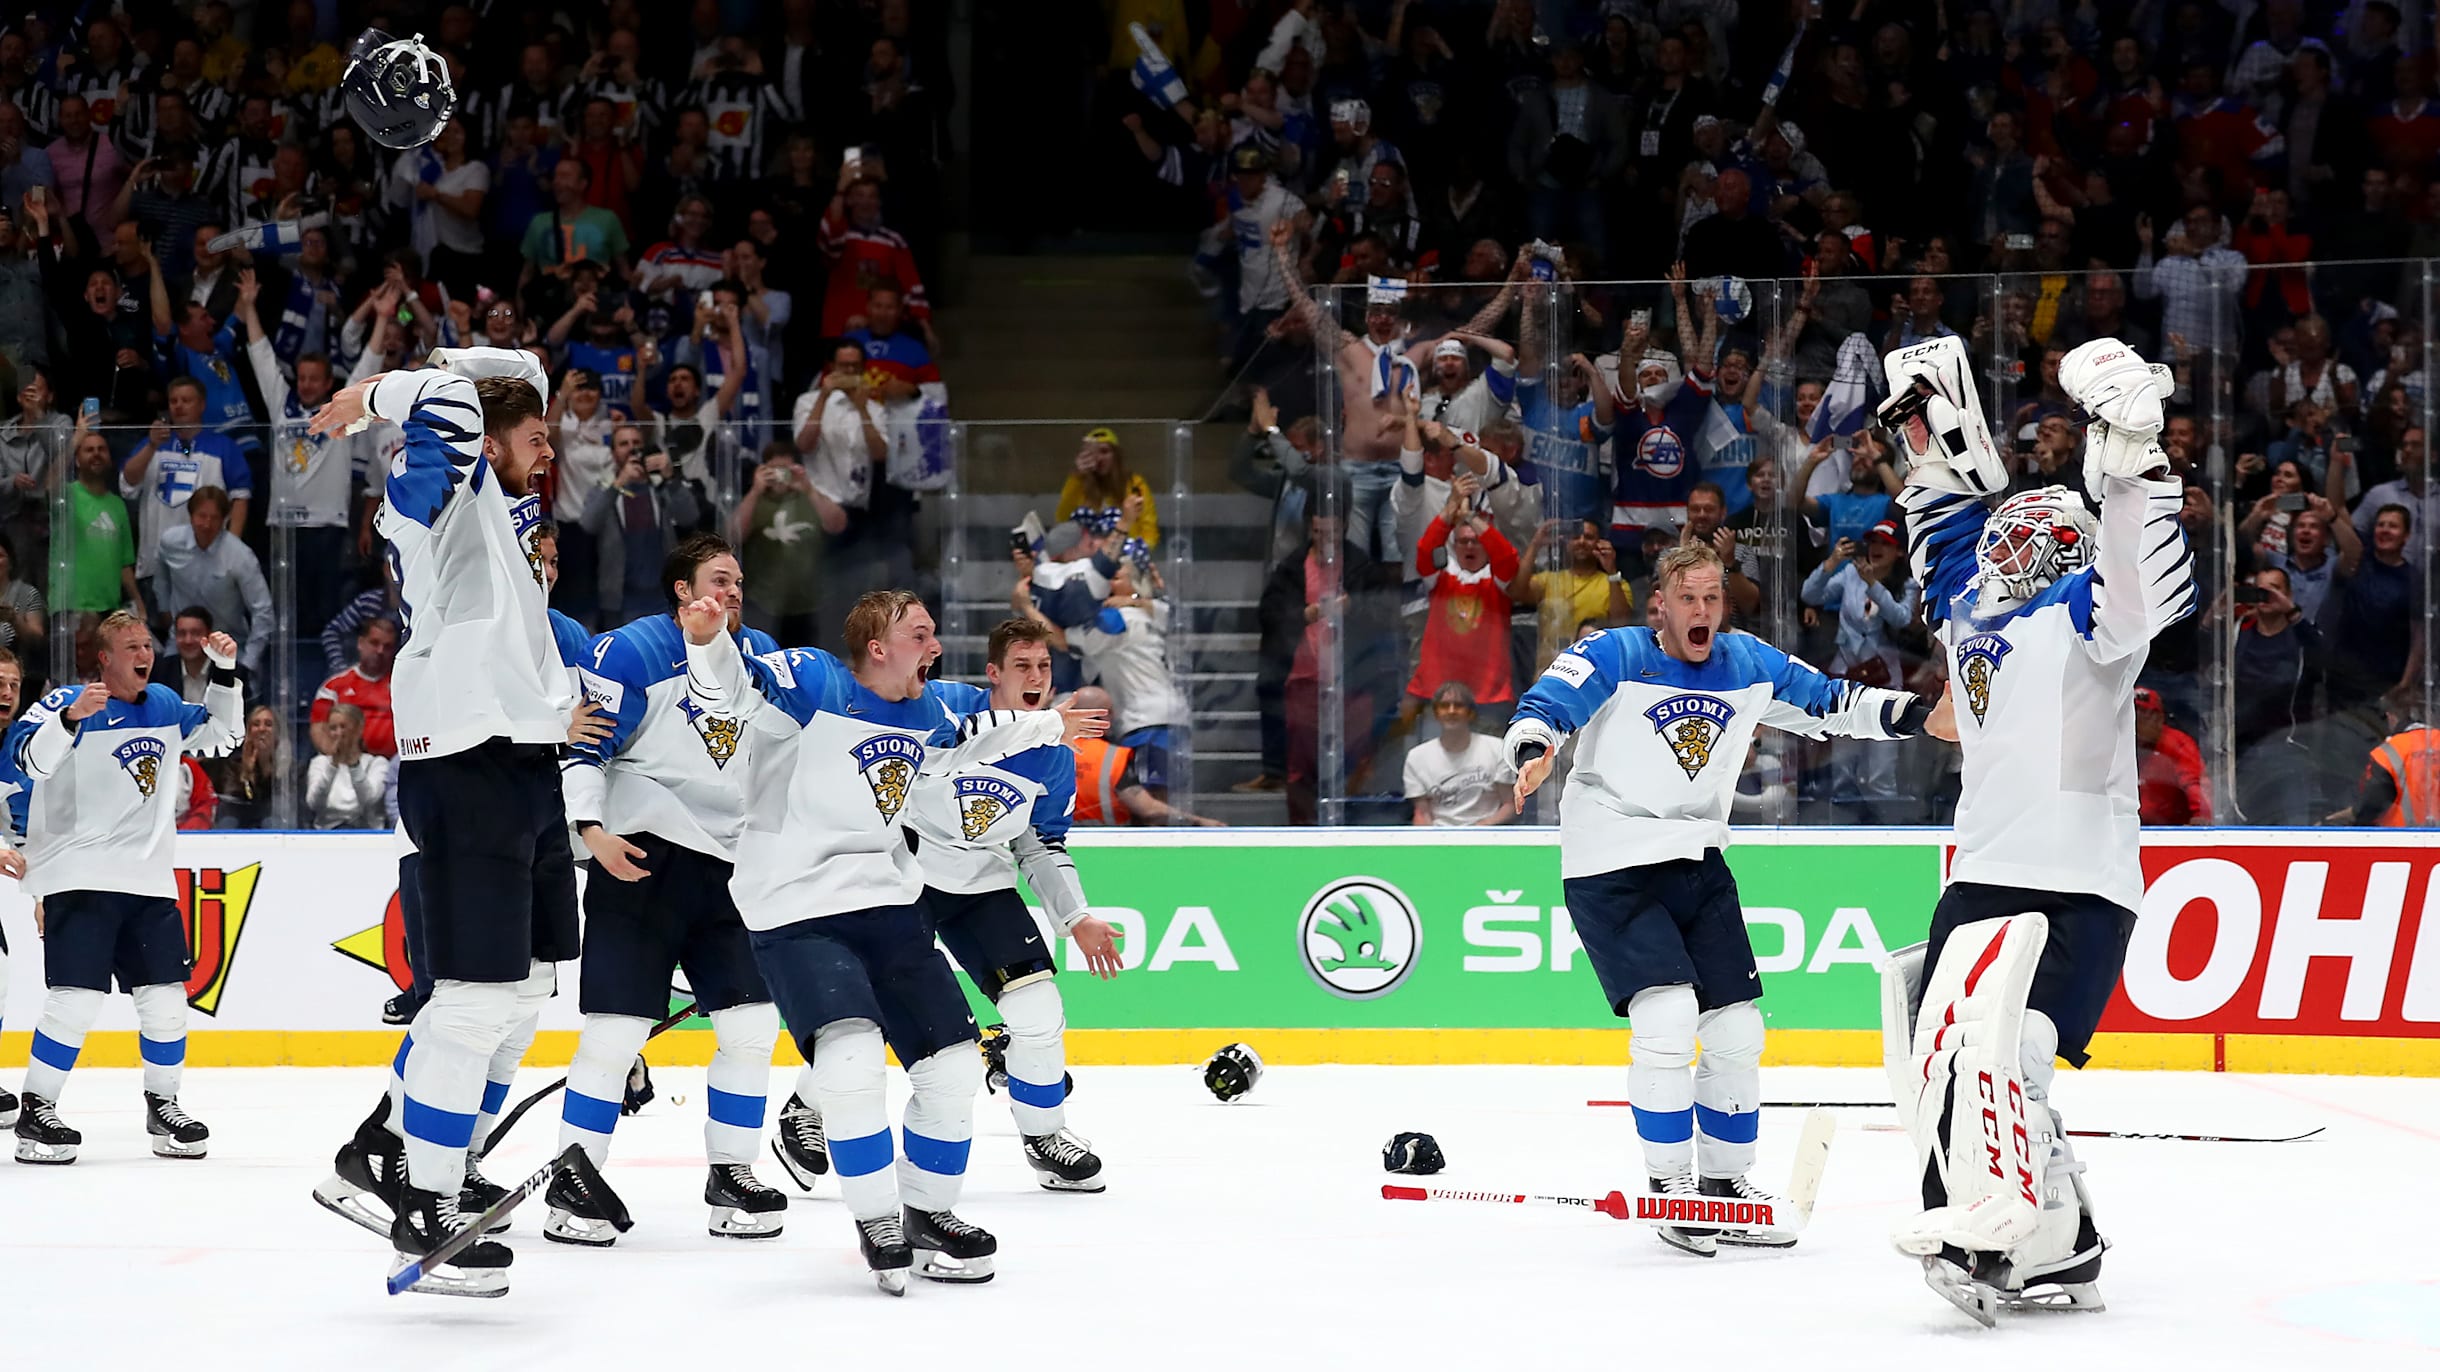 Things to know for the 2021 IIHF Ice Hockey World Championship